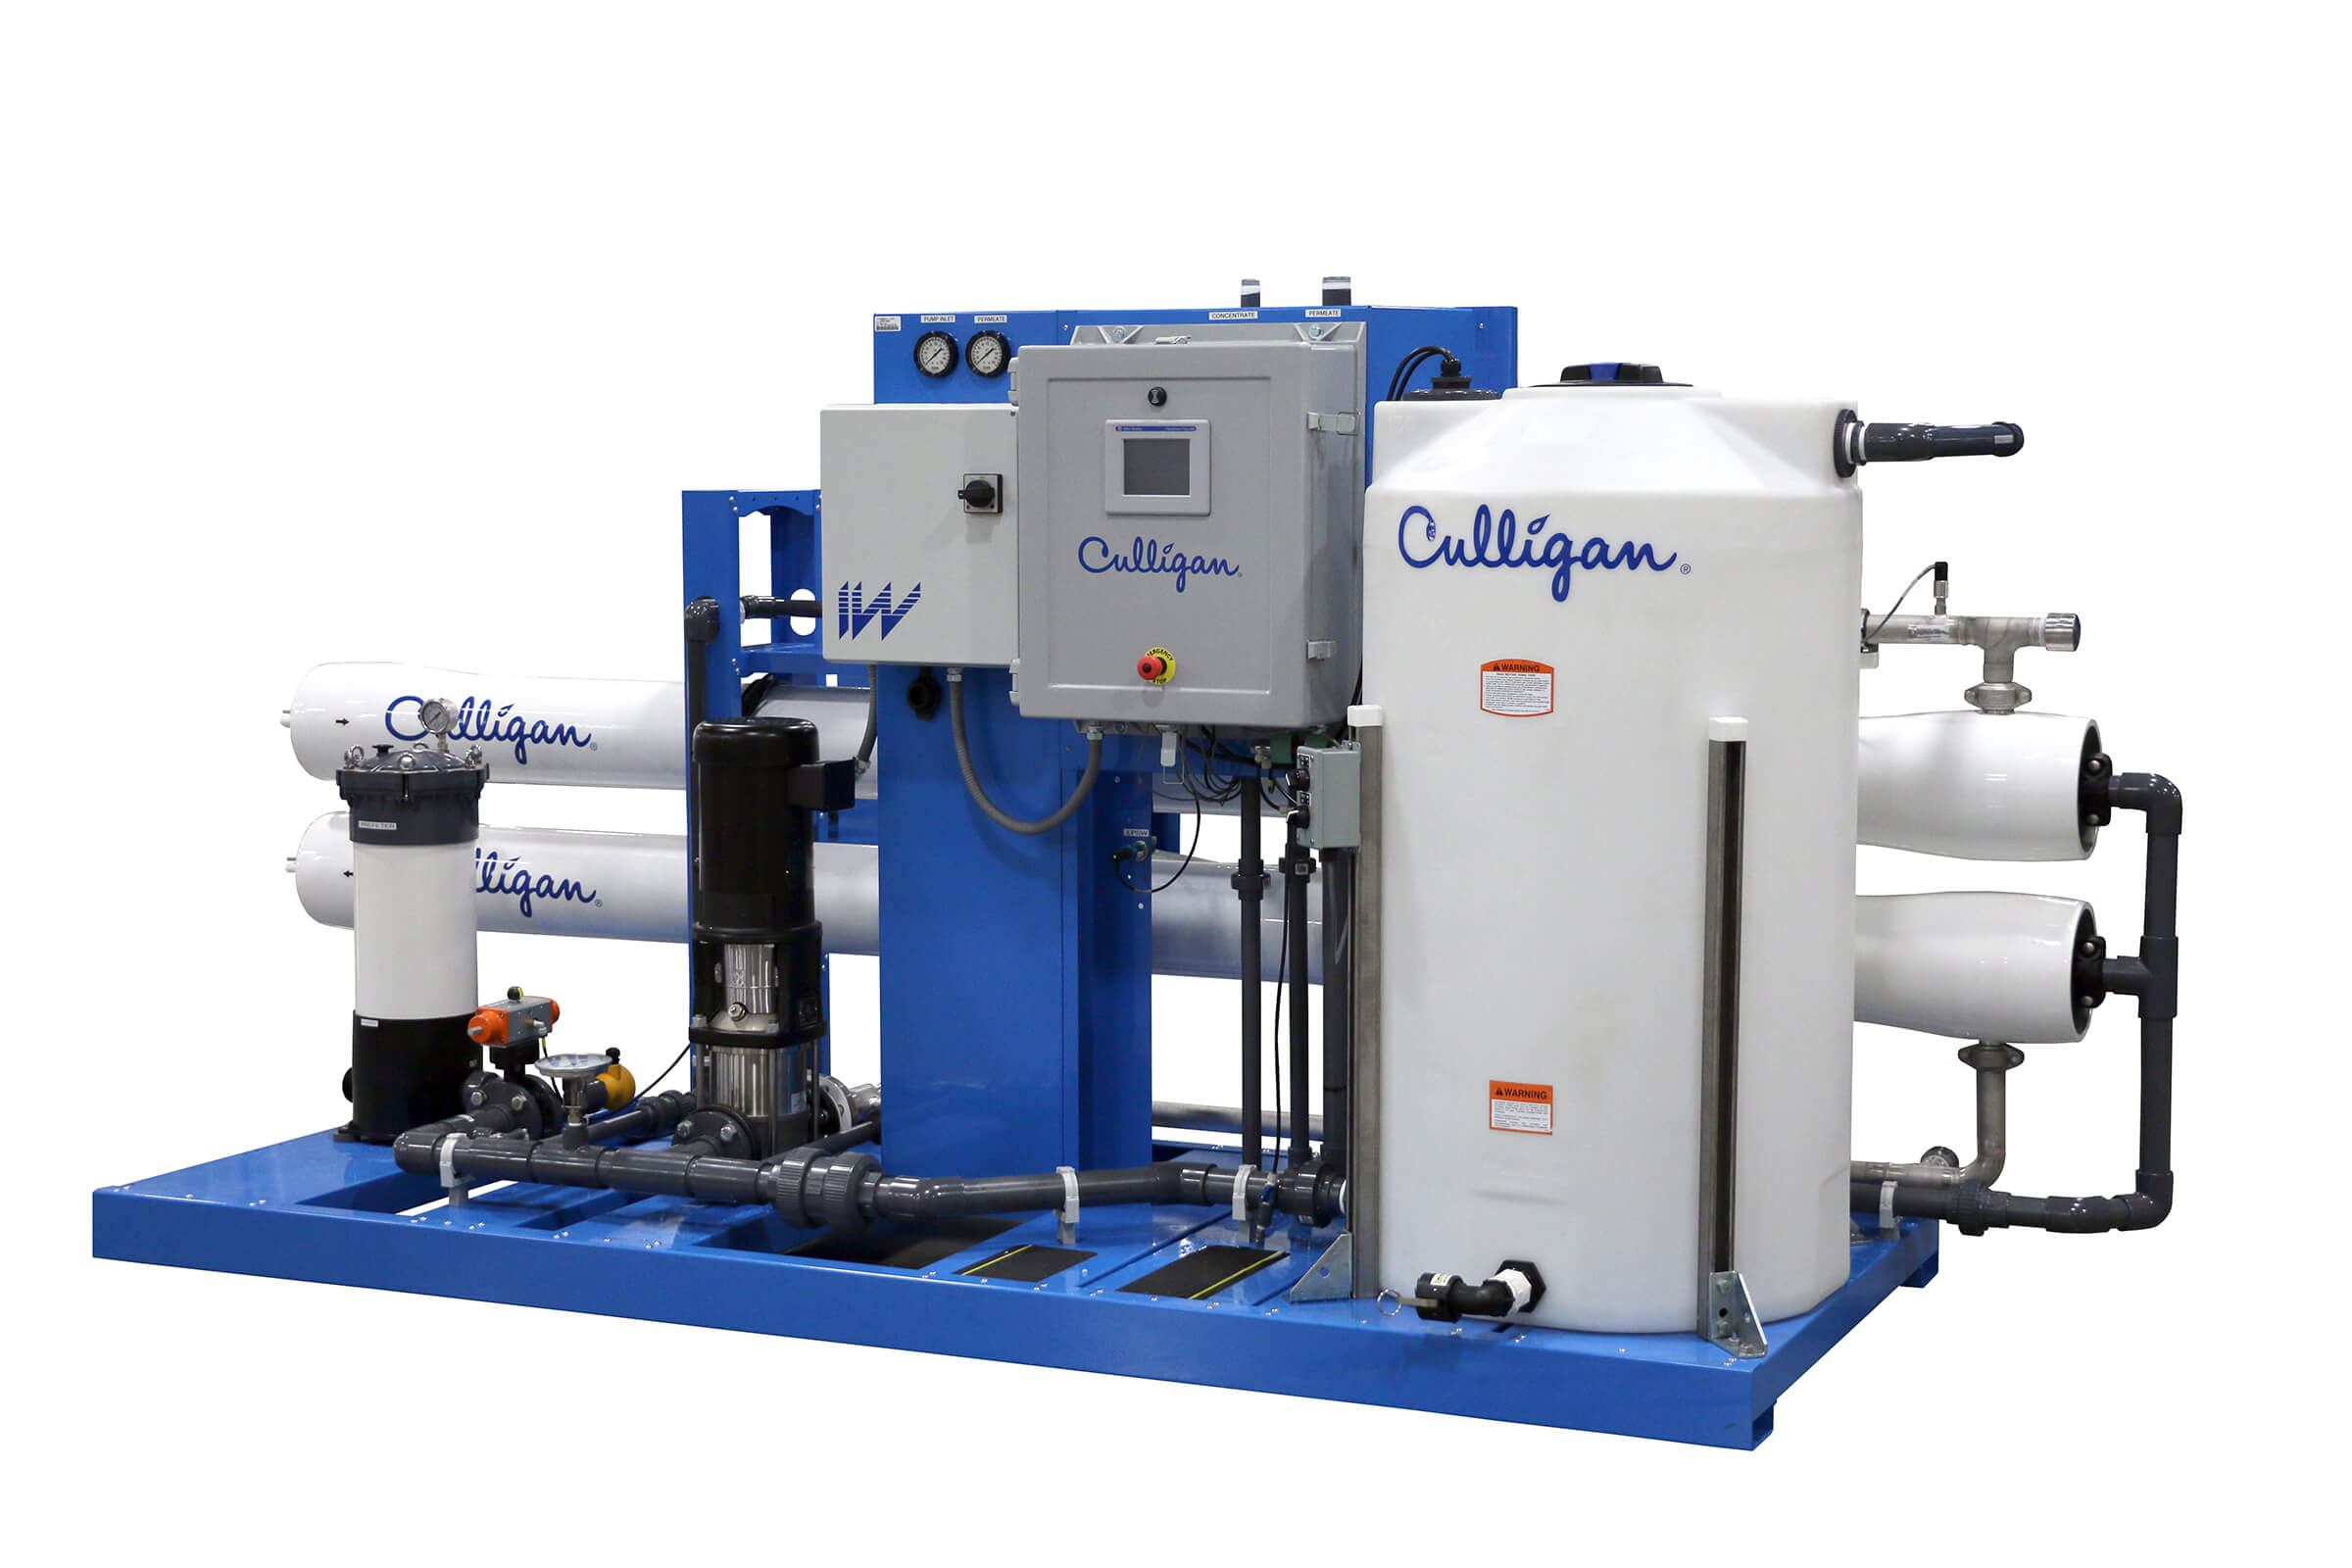 Culligan Industrial Reverse Osmosis water system